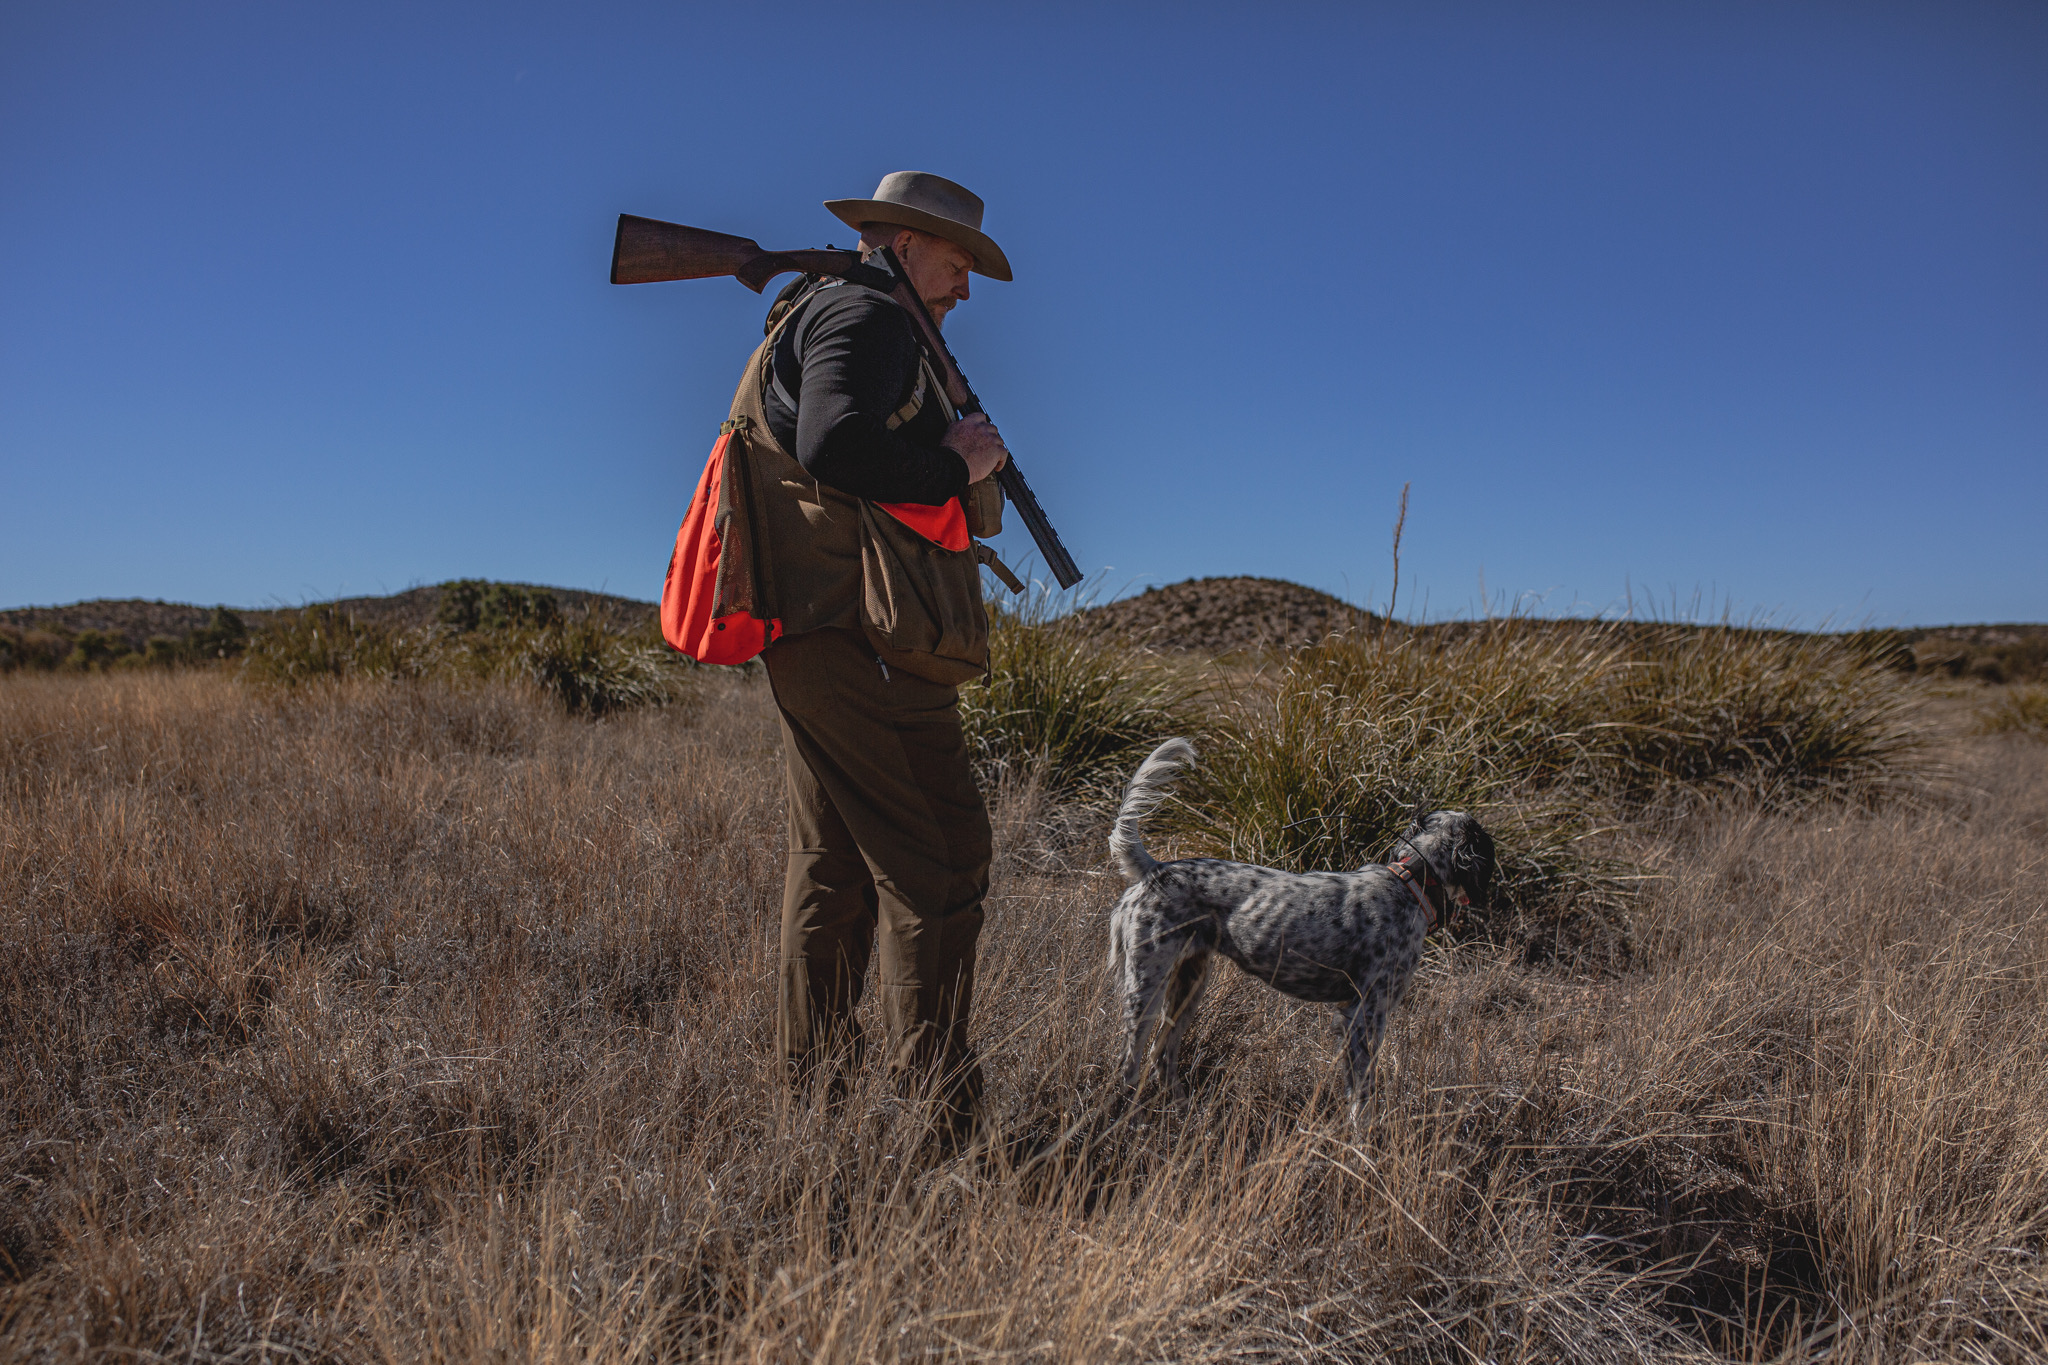 Peregrine Fund CEO Chris Parish, dressed in hunting clothes, walks through a field with his hunting dog and shotgun draped over his shoulder.